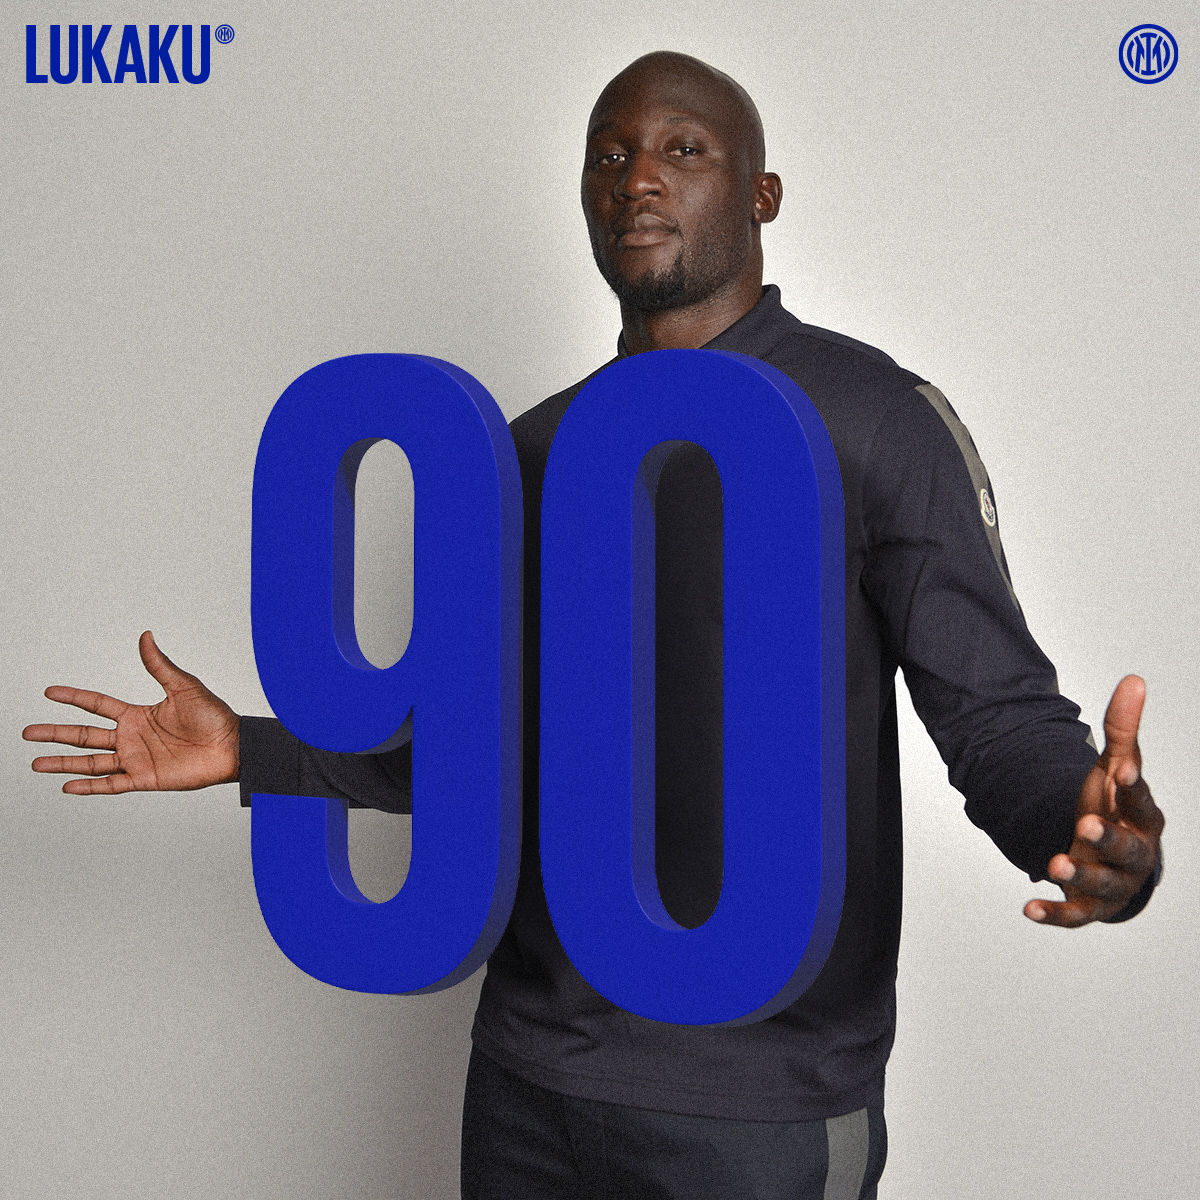 "Romelu Lukaku to wear jersey number 90 just shows how much Chelsea wasted in the deal" - Chelsea Fans